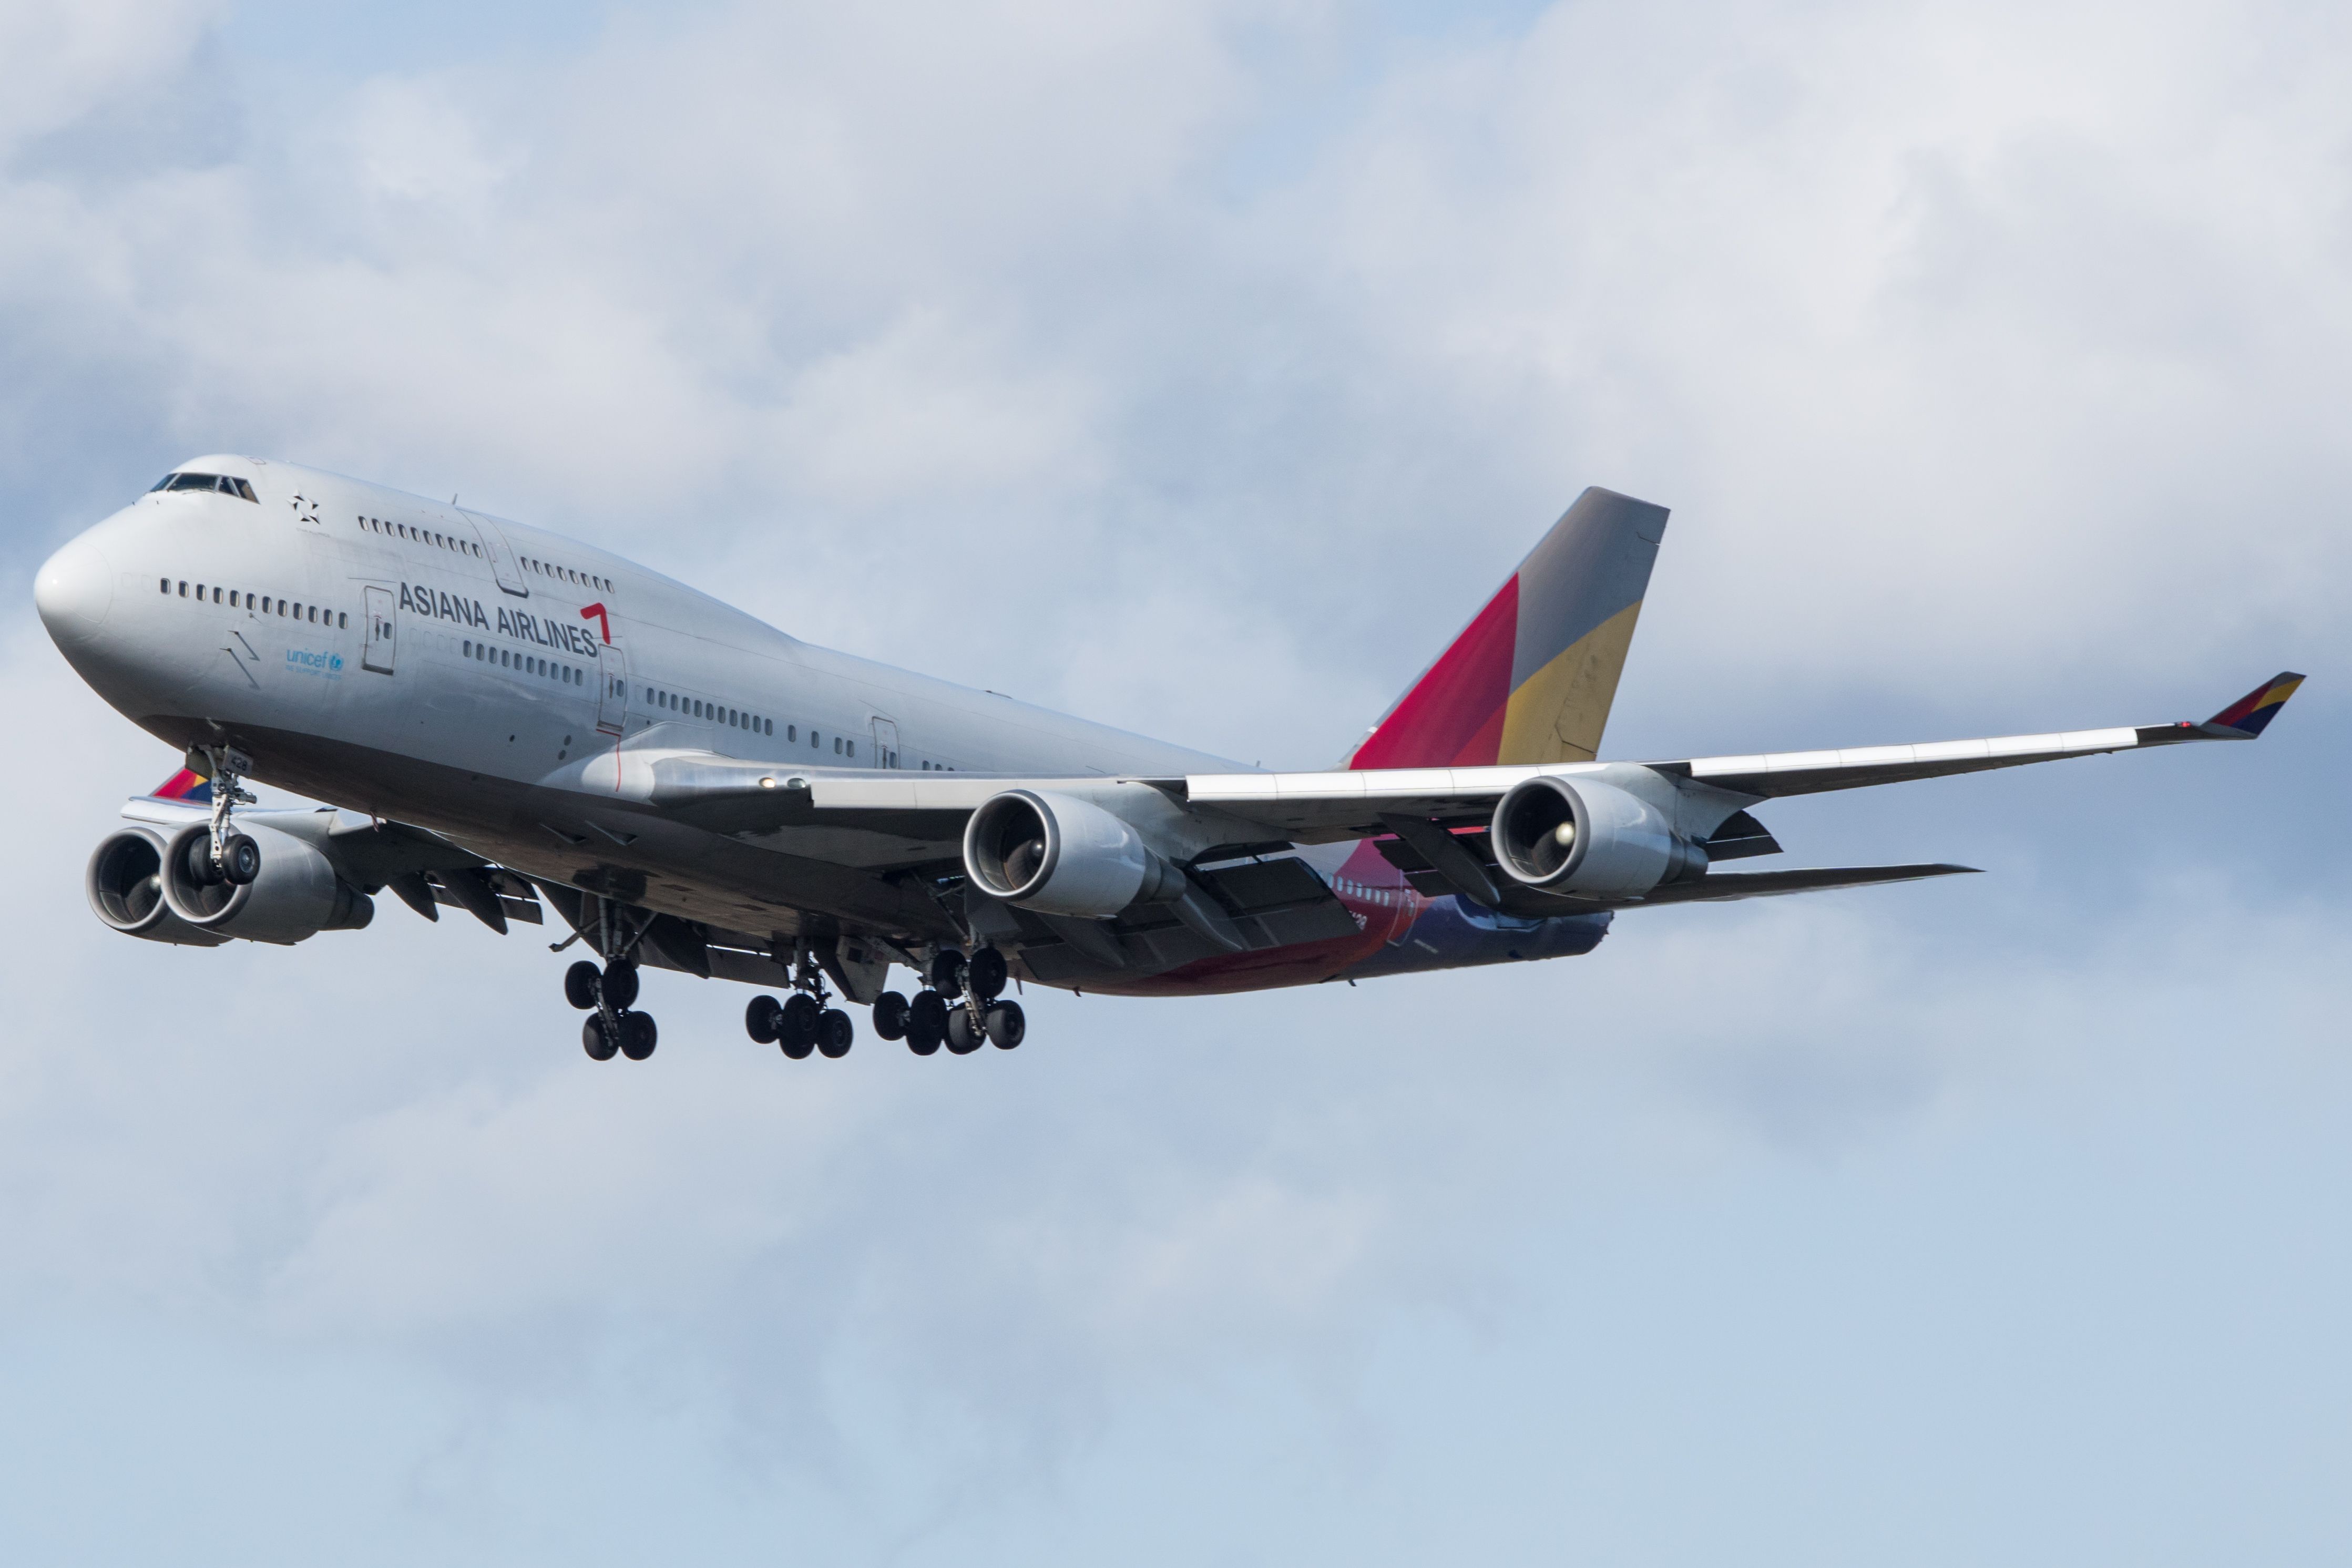 GettyImages-1040711162 Asiana Airlines Boeing 747-400